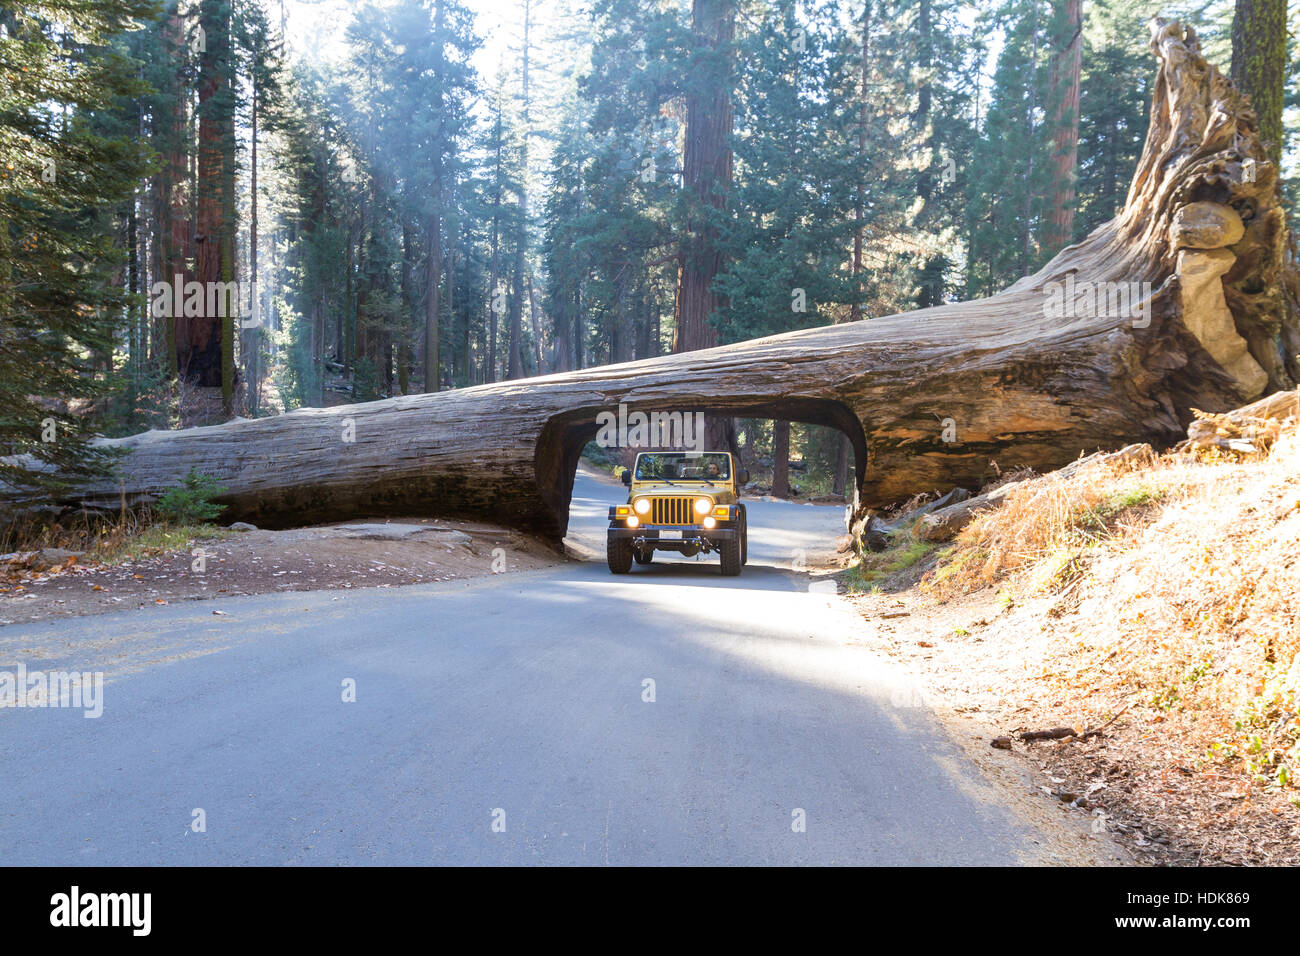 Sequoia NP, California - November 14: Gold jeep going thru a tunnel cut out of a single Sequoia tree trunk. November 14 2016, Sequoia NP, California. Stock Photo